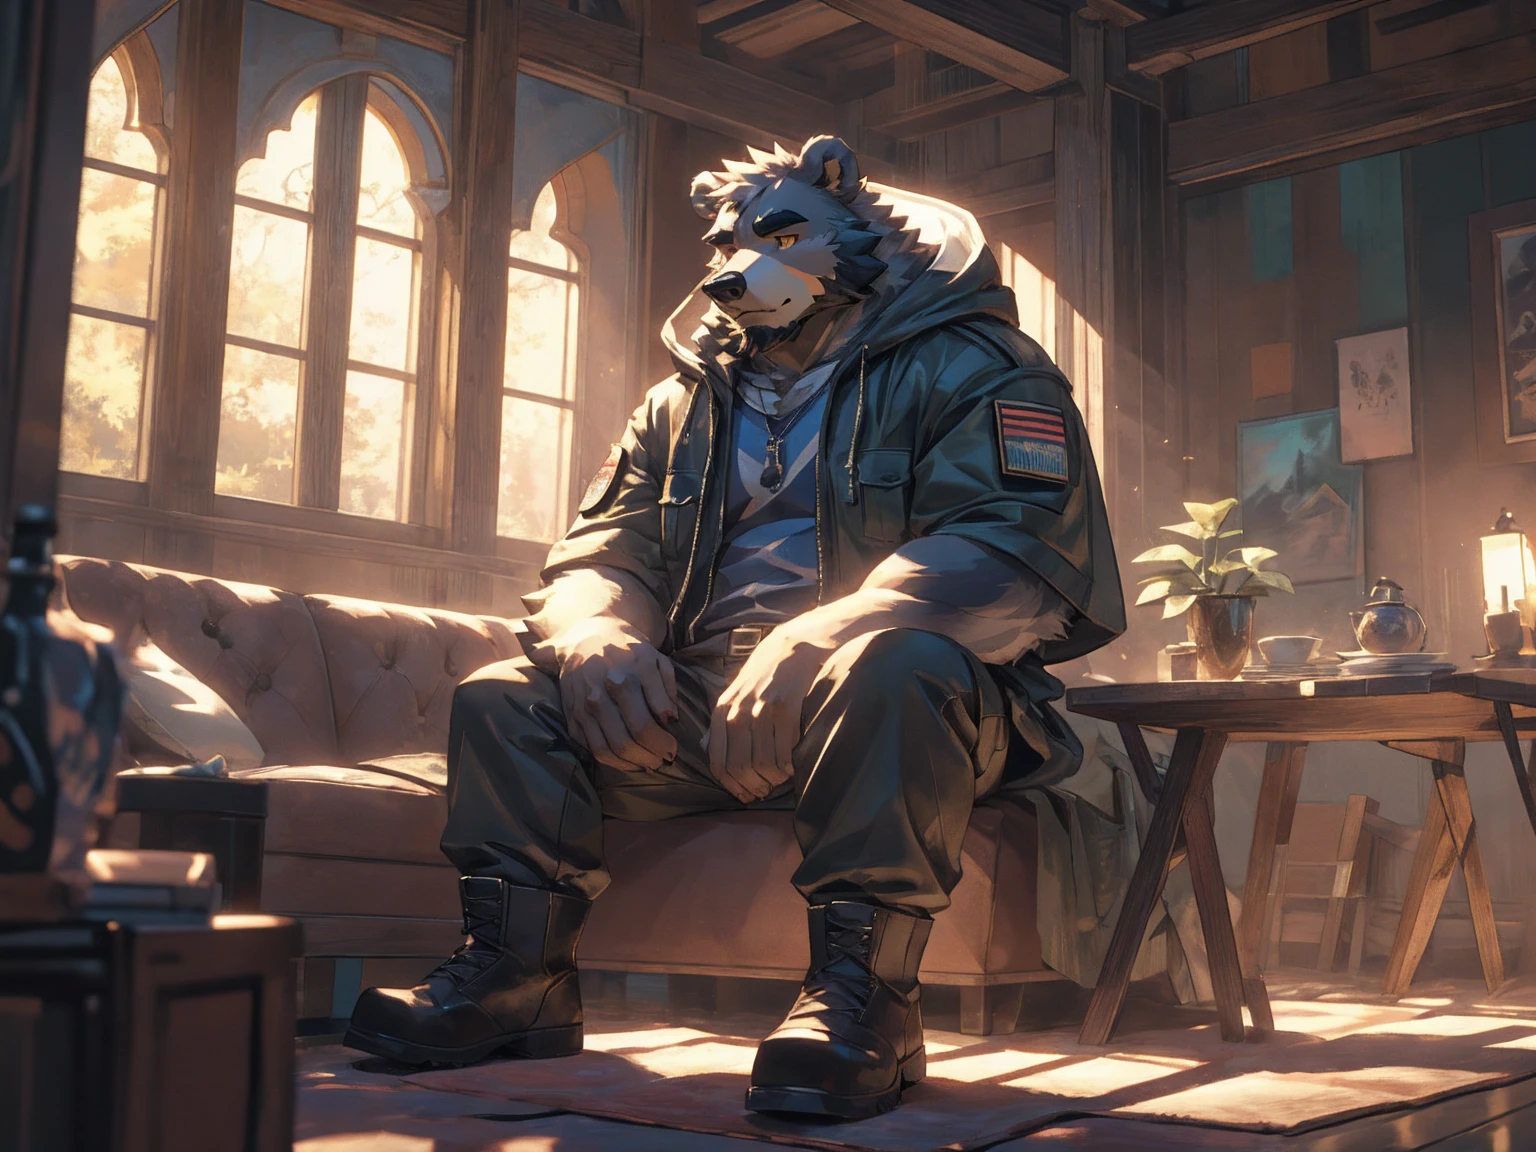 (masterpiece:1.2), best quality,pixiv,official art,perfect anatomy, (Ray tracing, light),solo, (1_male:1.3) , (muscle), (grey fur:1.4), (muscle bear), (beard:1.2), (gleaming golden eyes), bear tail, full body, Thick black eyebrows,(open hooded parka), (naked inside), jeans, (cargo pants:1.2),boots,(indoor),(a cozy and peaceful interior with a large window), character sitting on sofa
